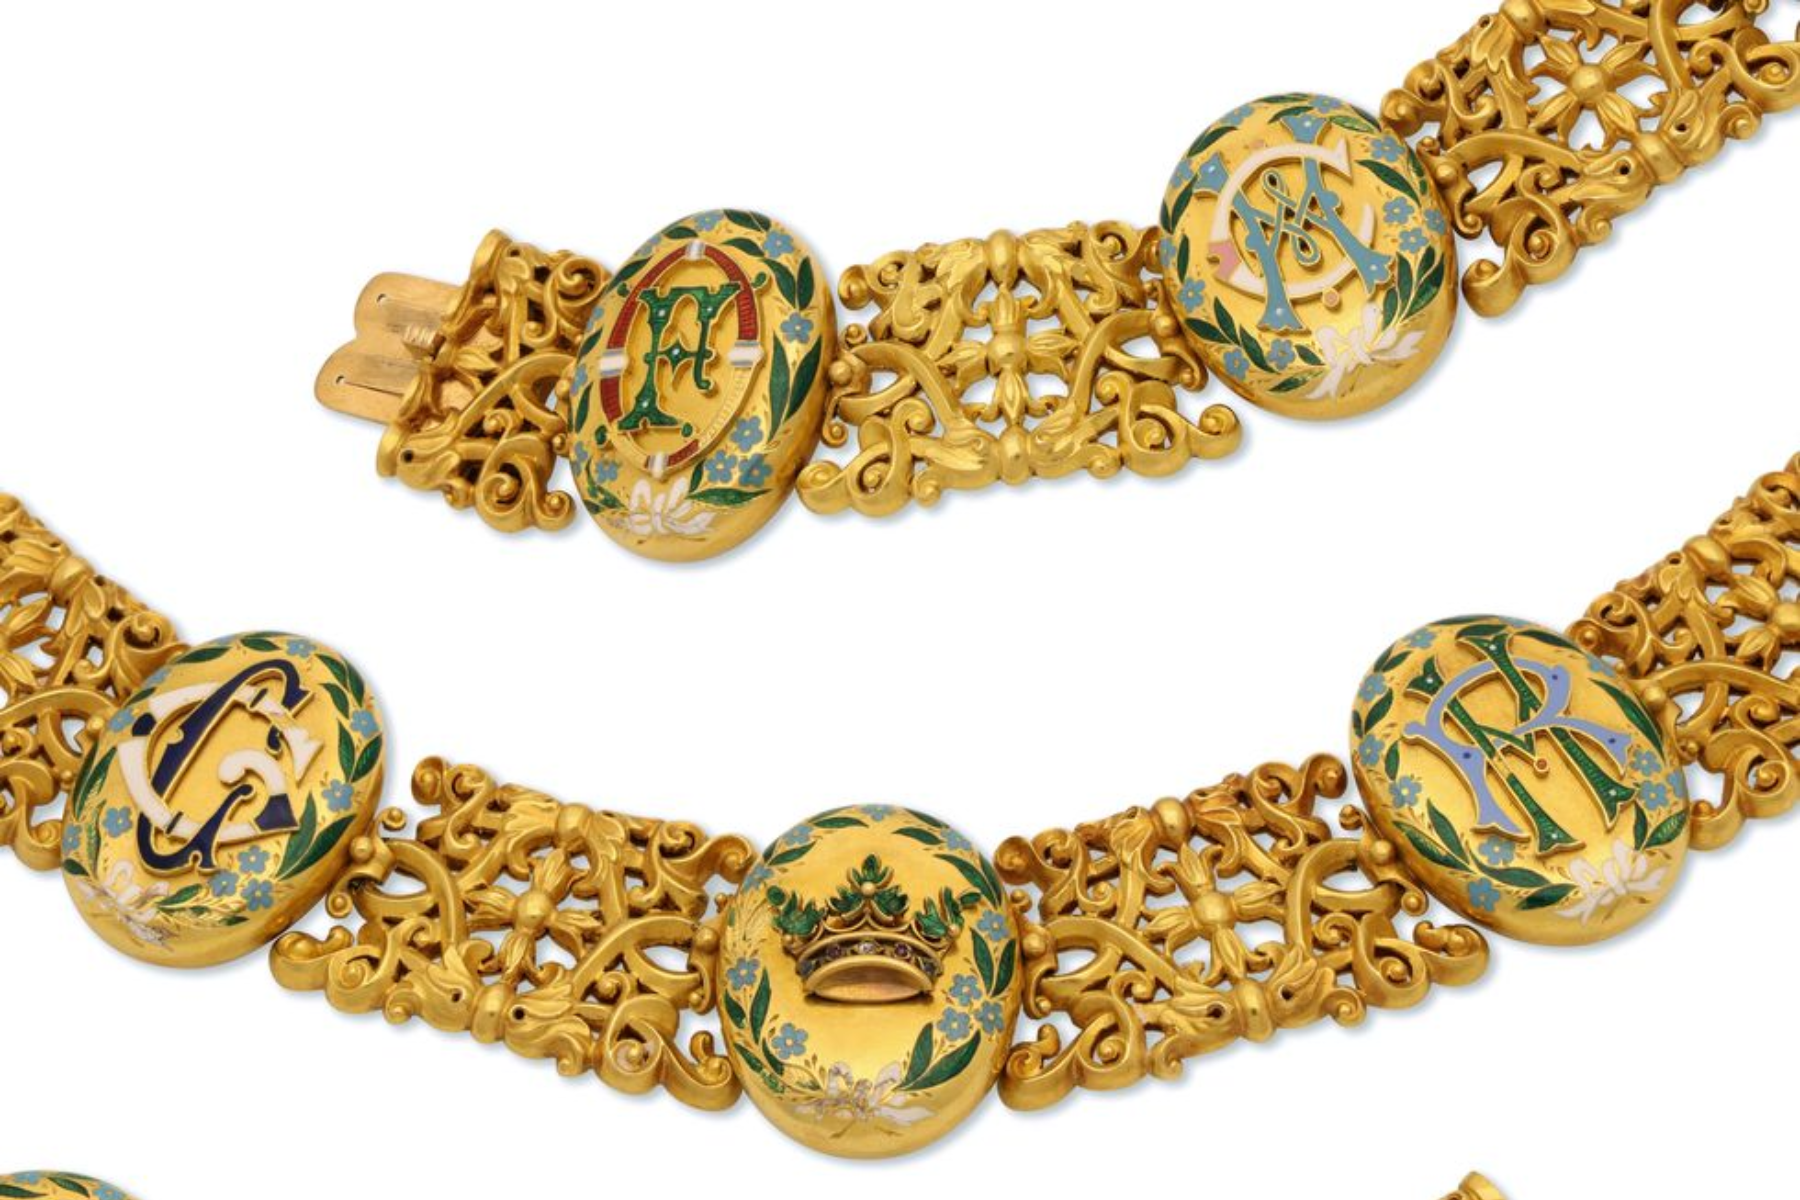 The necklace’s gold collar set design is broken up by eight oval glazed back lockets, seven of which consist of engravings of their children’s initials at the front